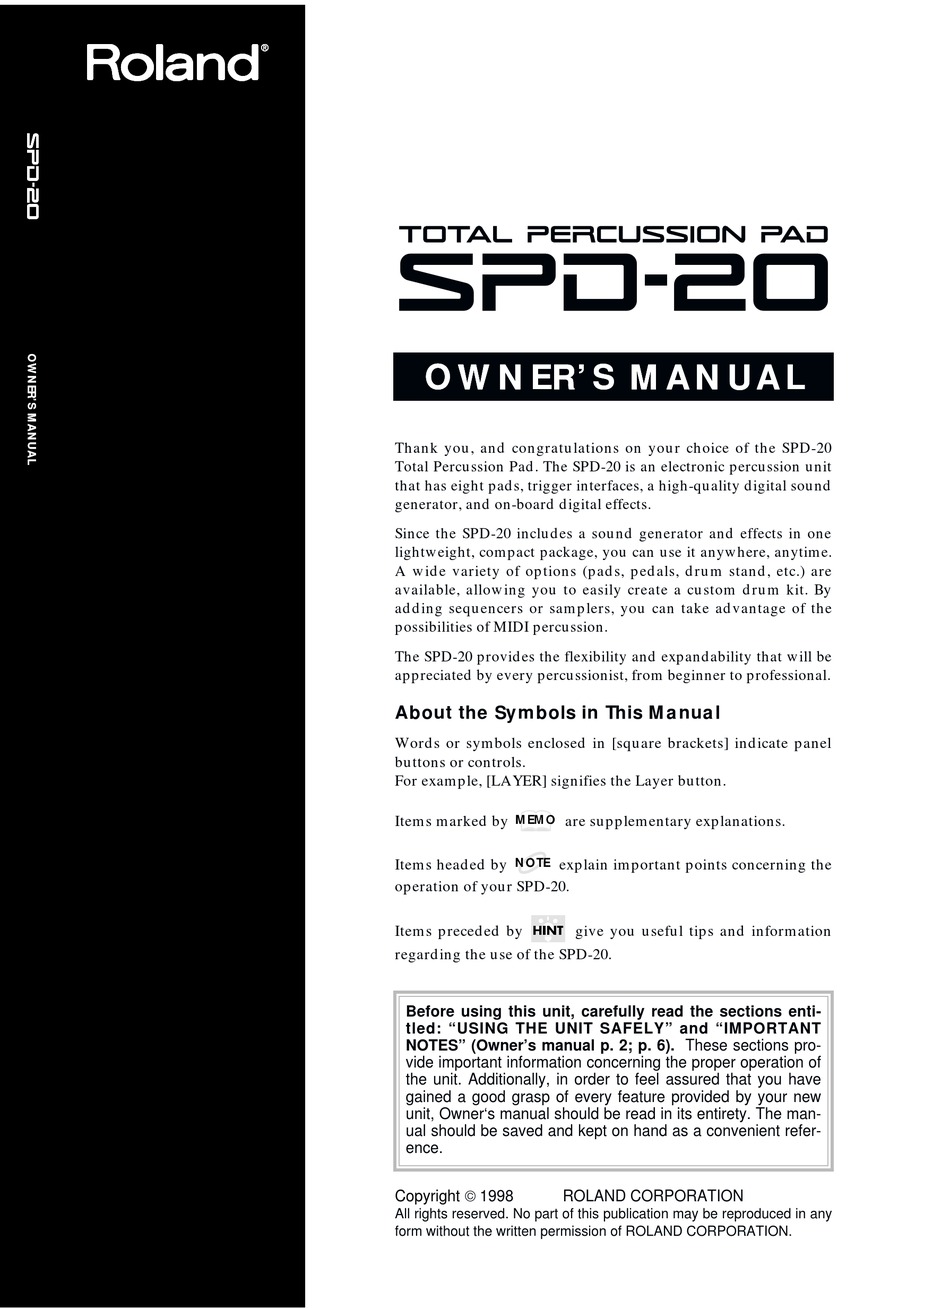 roland spd 20 specifications